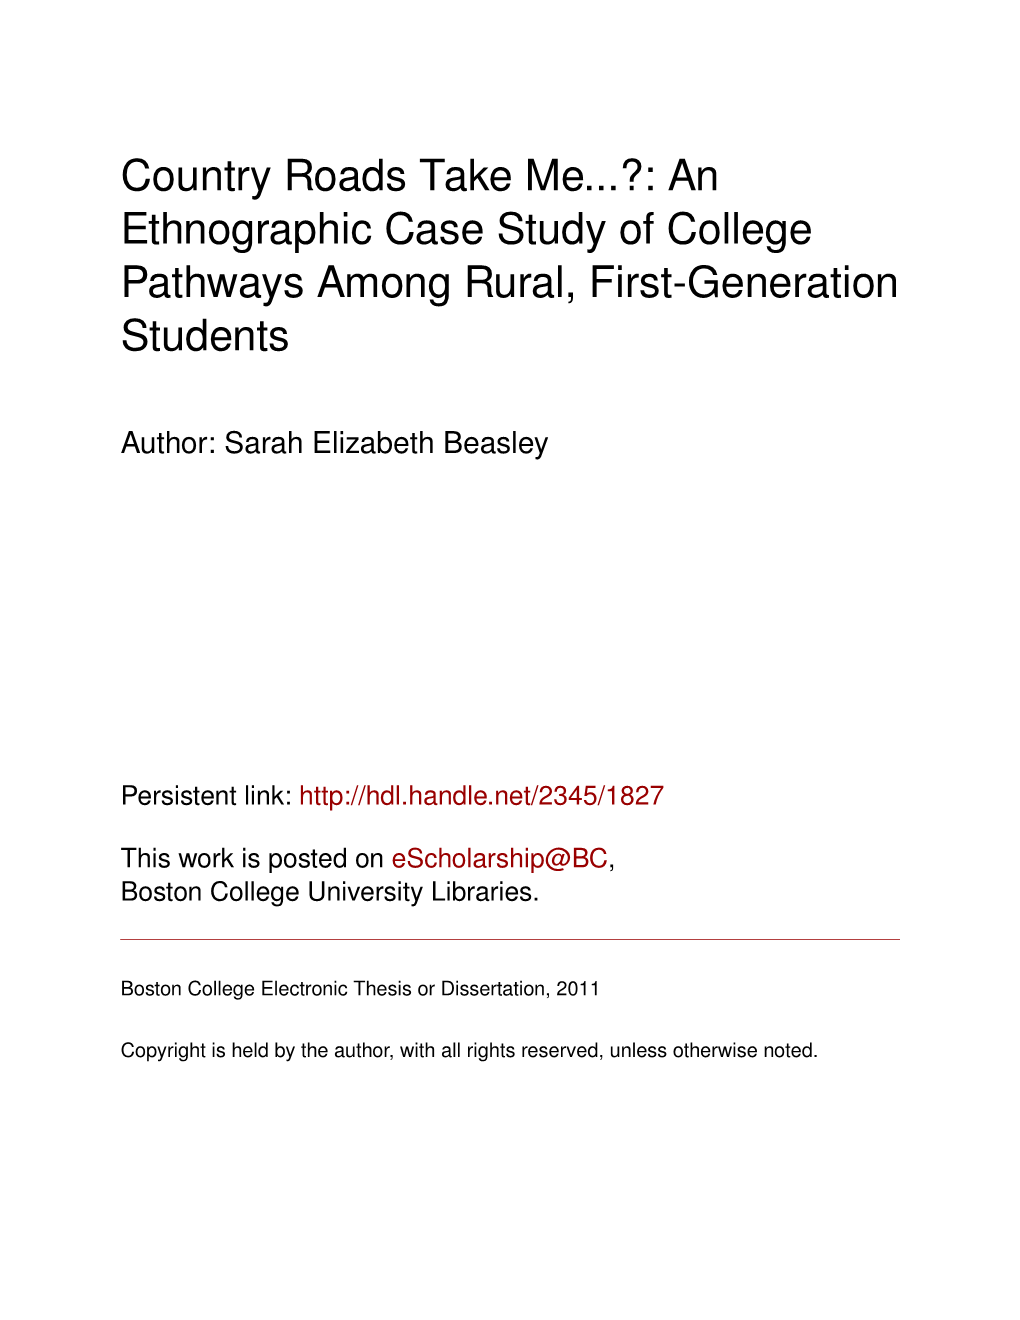 An Ethnographic Case Study of College Pathways Among Rural, First-Generation Students